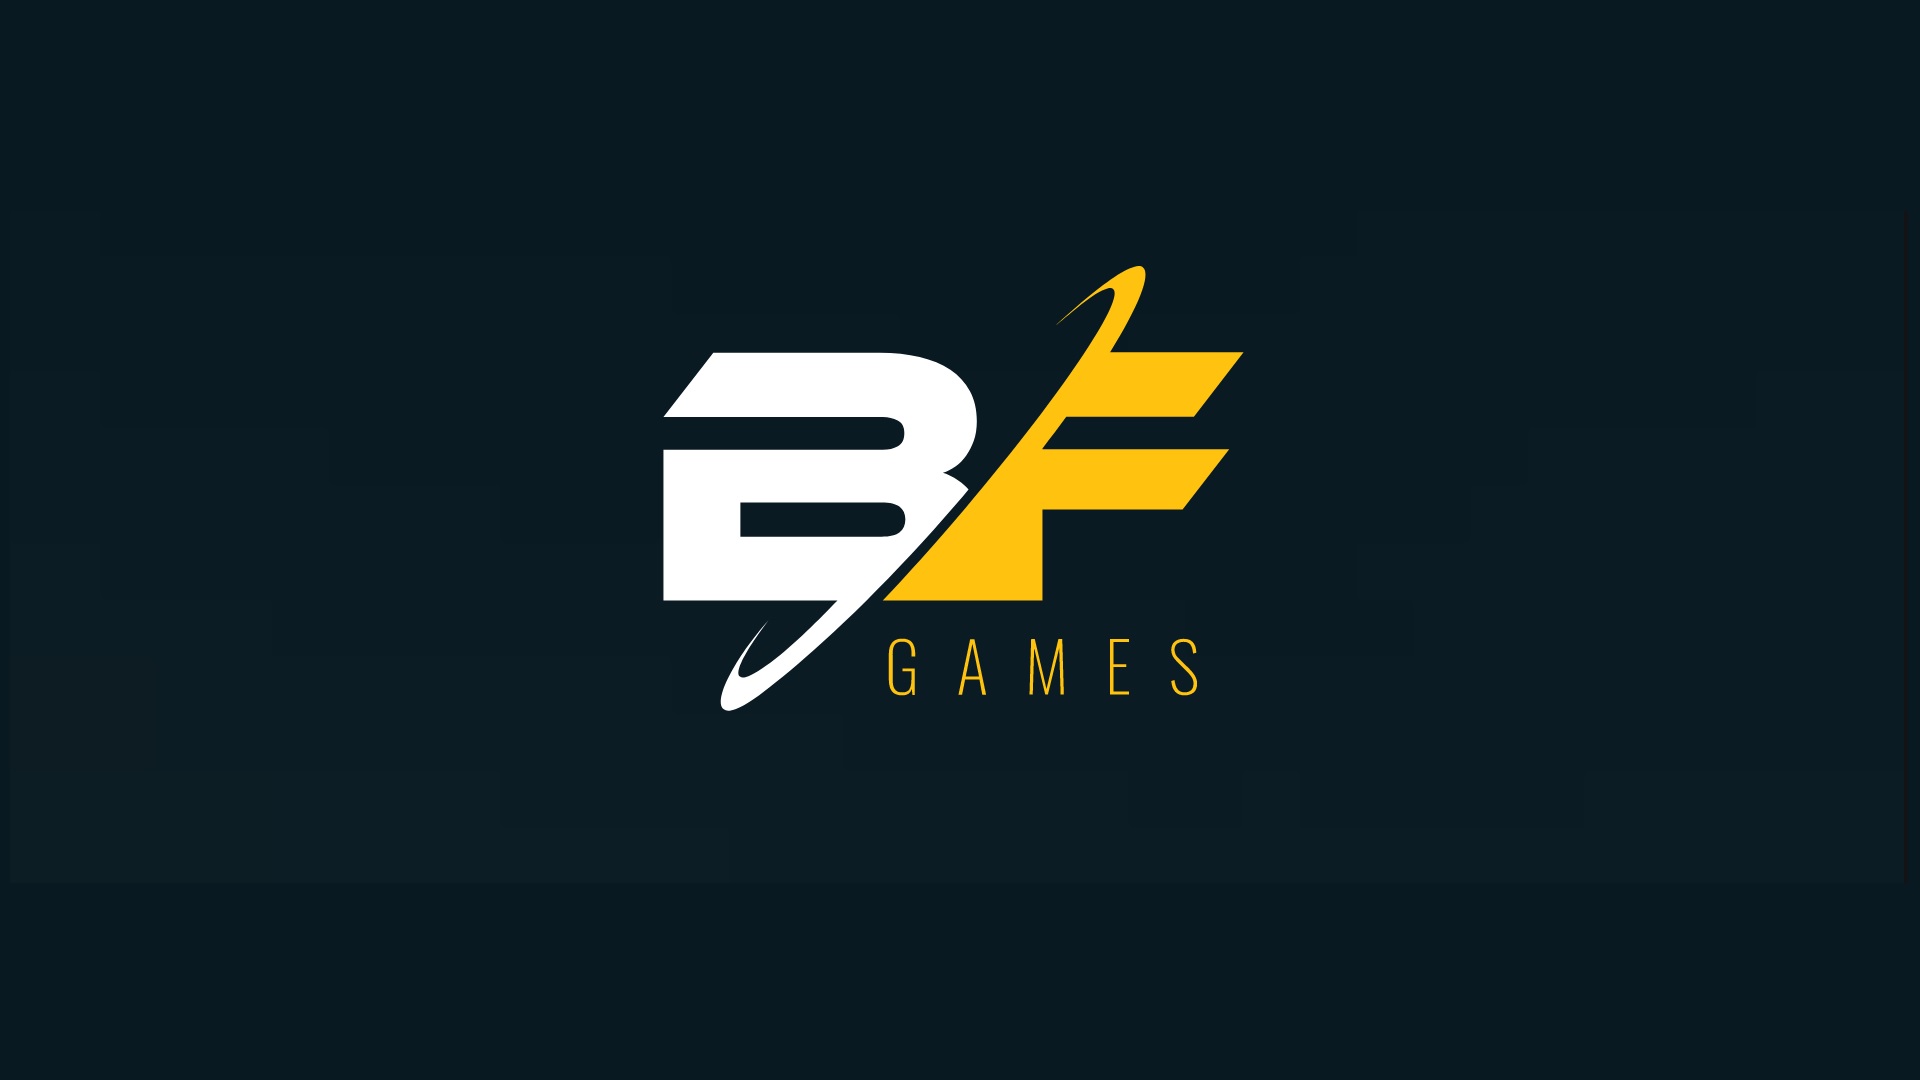 BF Games expands in Romania with Favbet